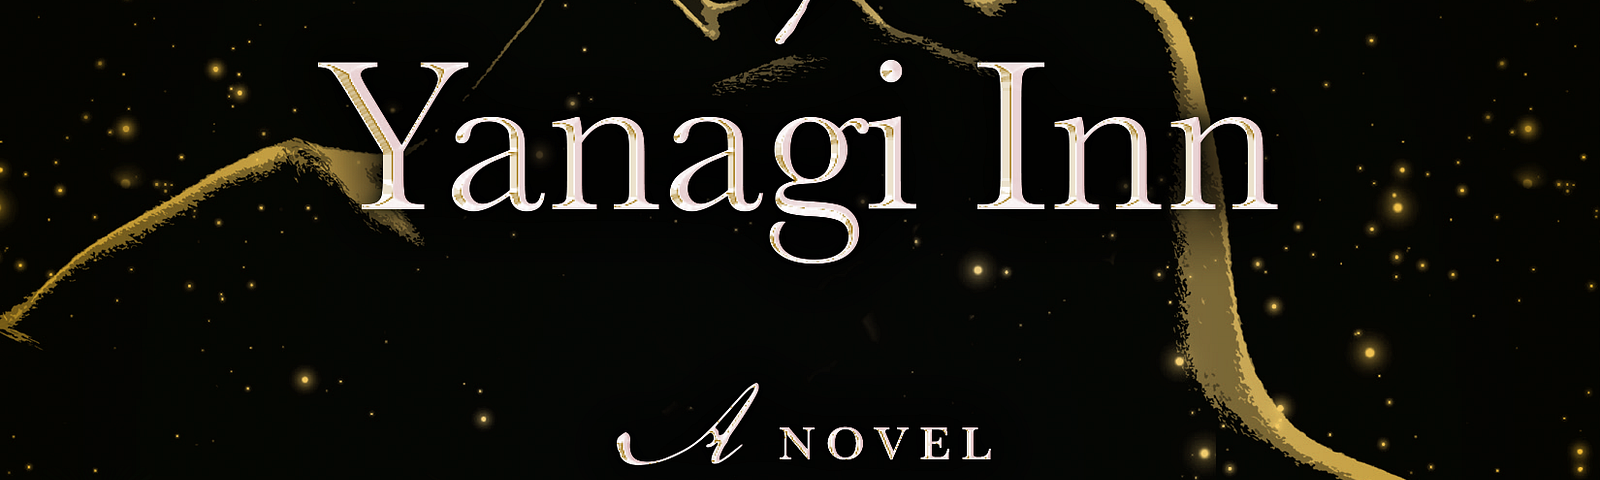 Book review of The Secrets of Yanagi Inn. A novel by Amber A. Logan about how to cope with grief and loss.